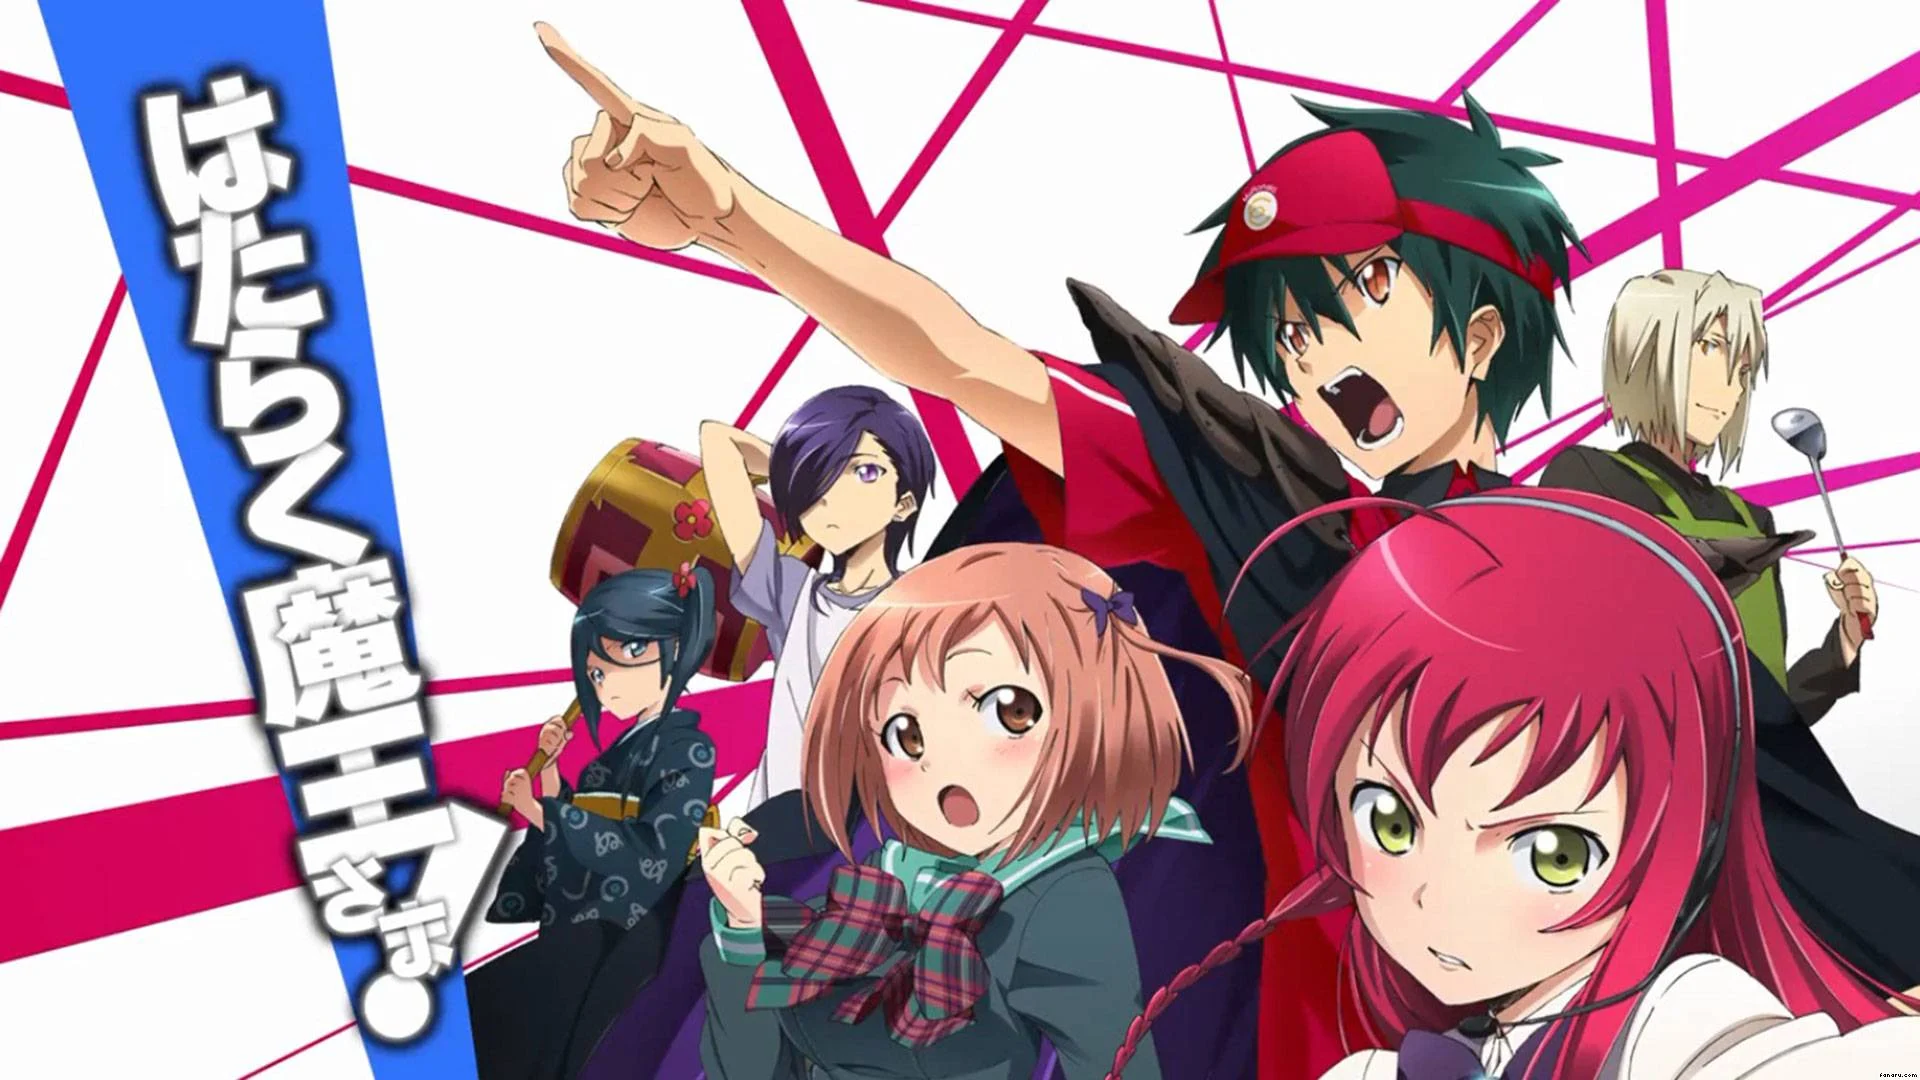 The Devil is a Part-Timer Season 2 Episode 24 English Dub release date